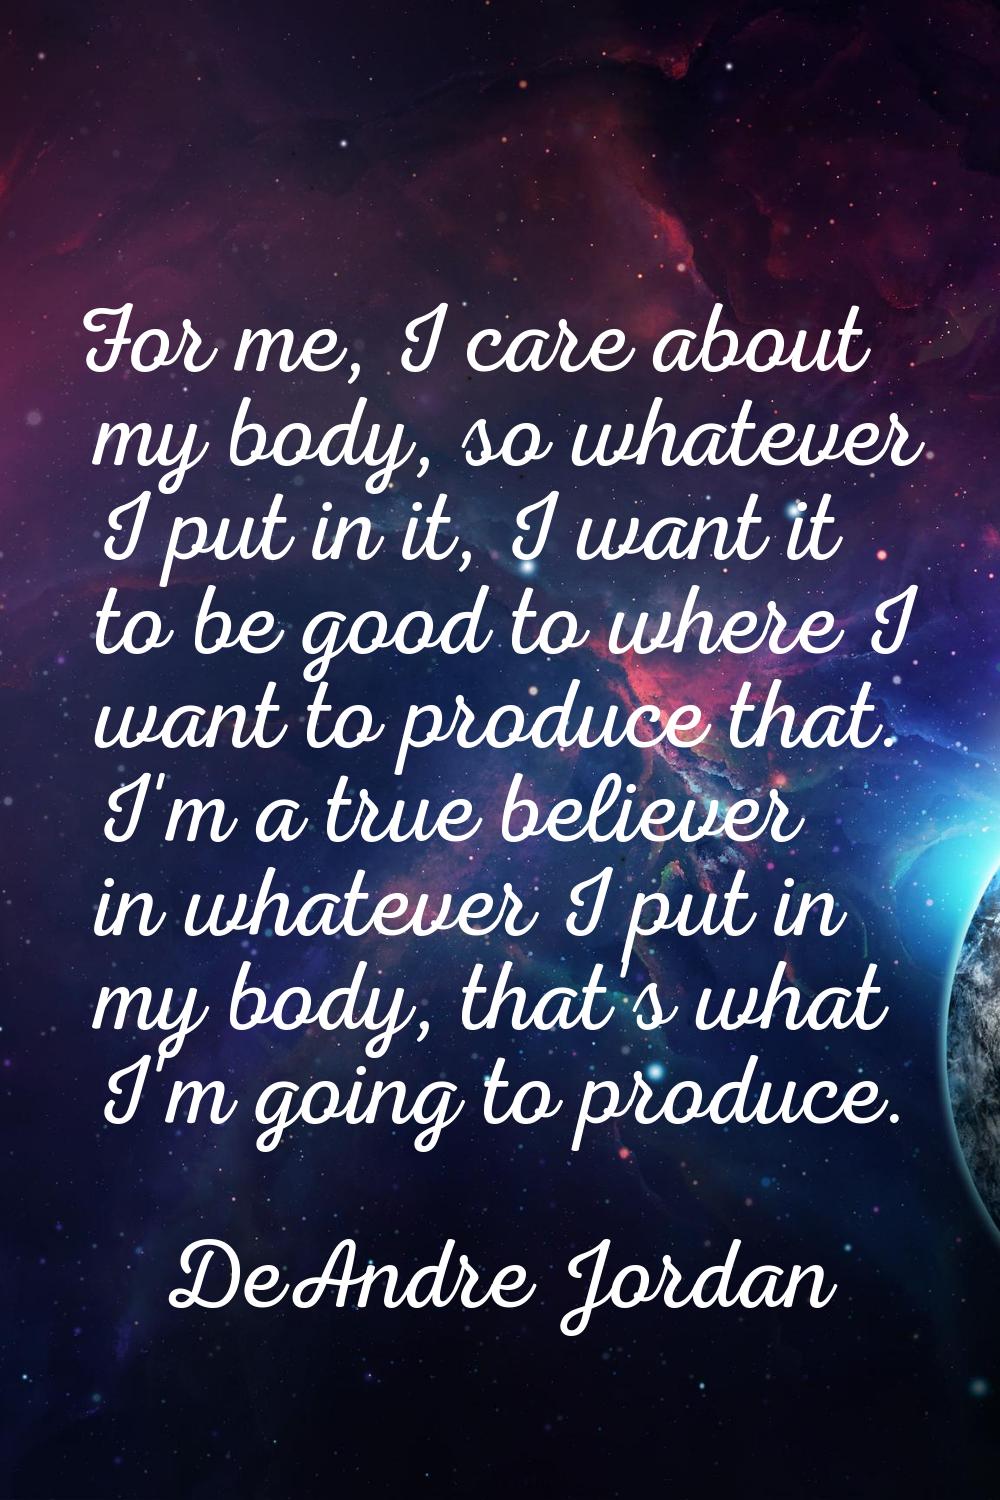 For me, I care about my body, so whatever I put in it, I want it to be good to where I want to prod